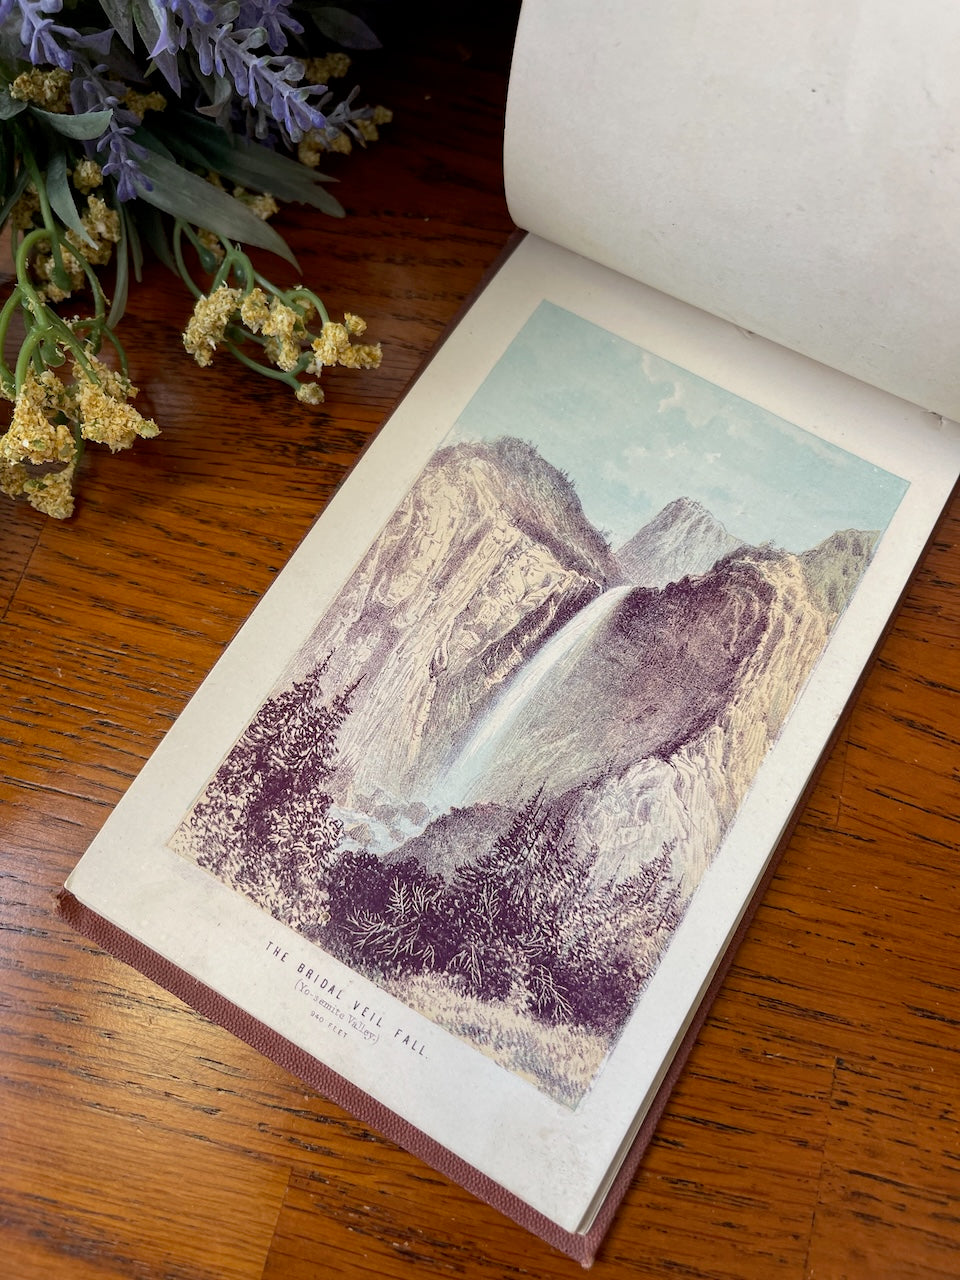 The Yosemite Valley / Pictorial Guide Book / n.d. 1870